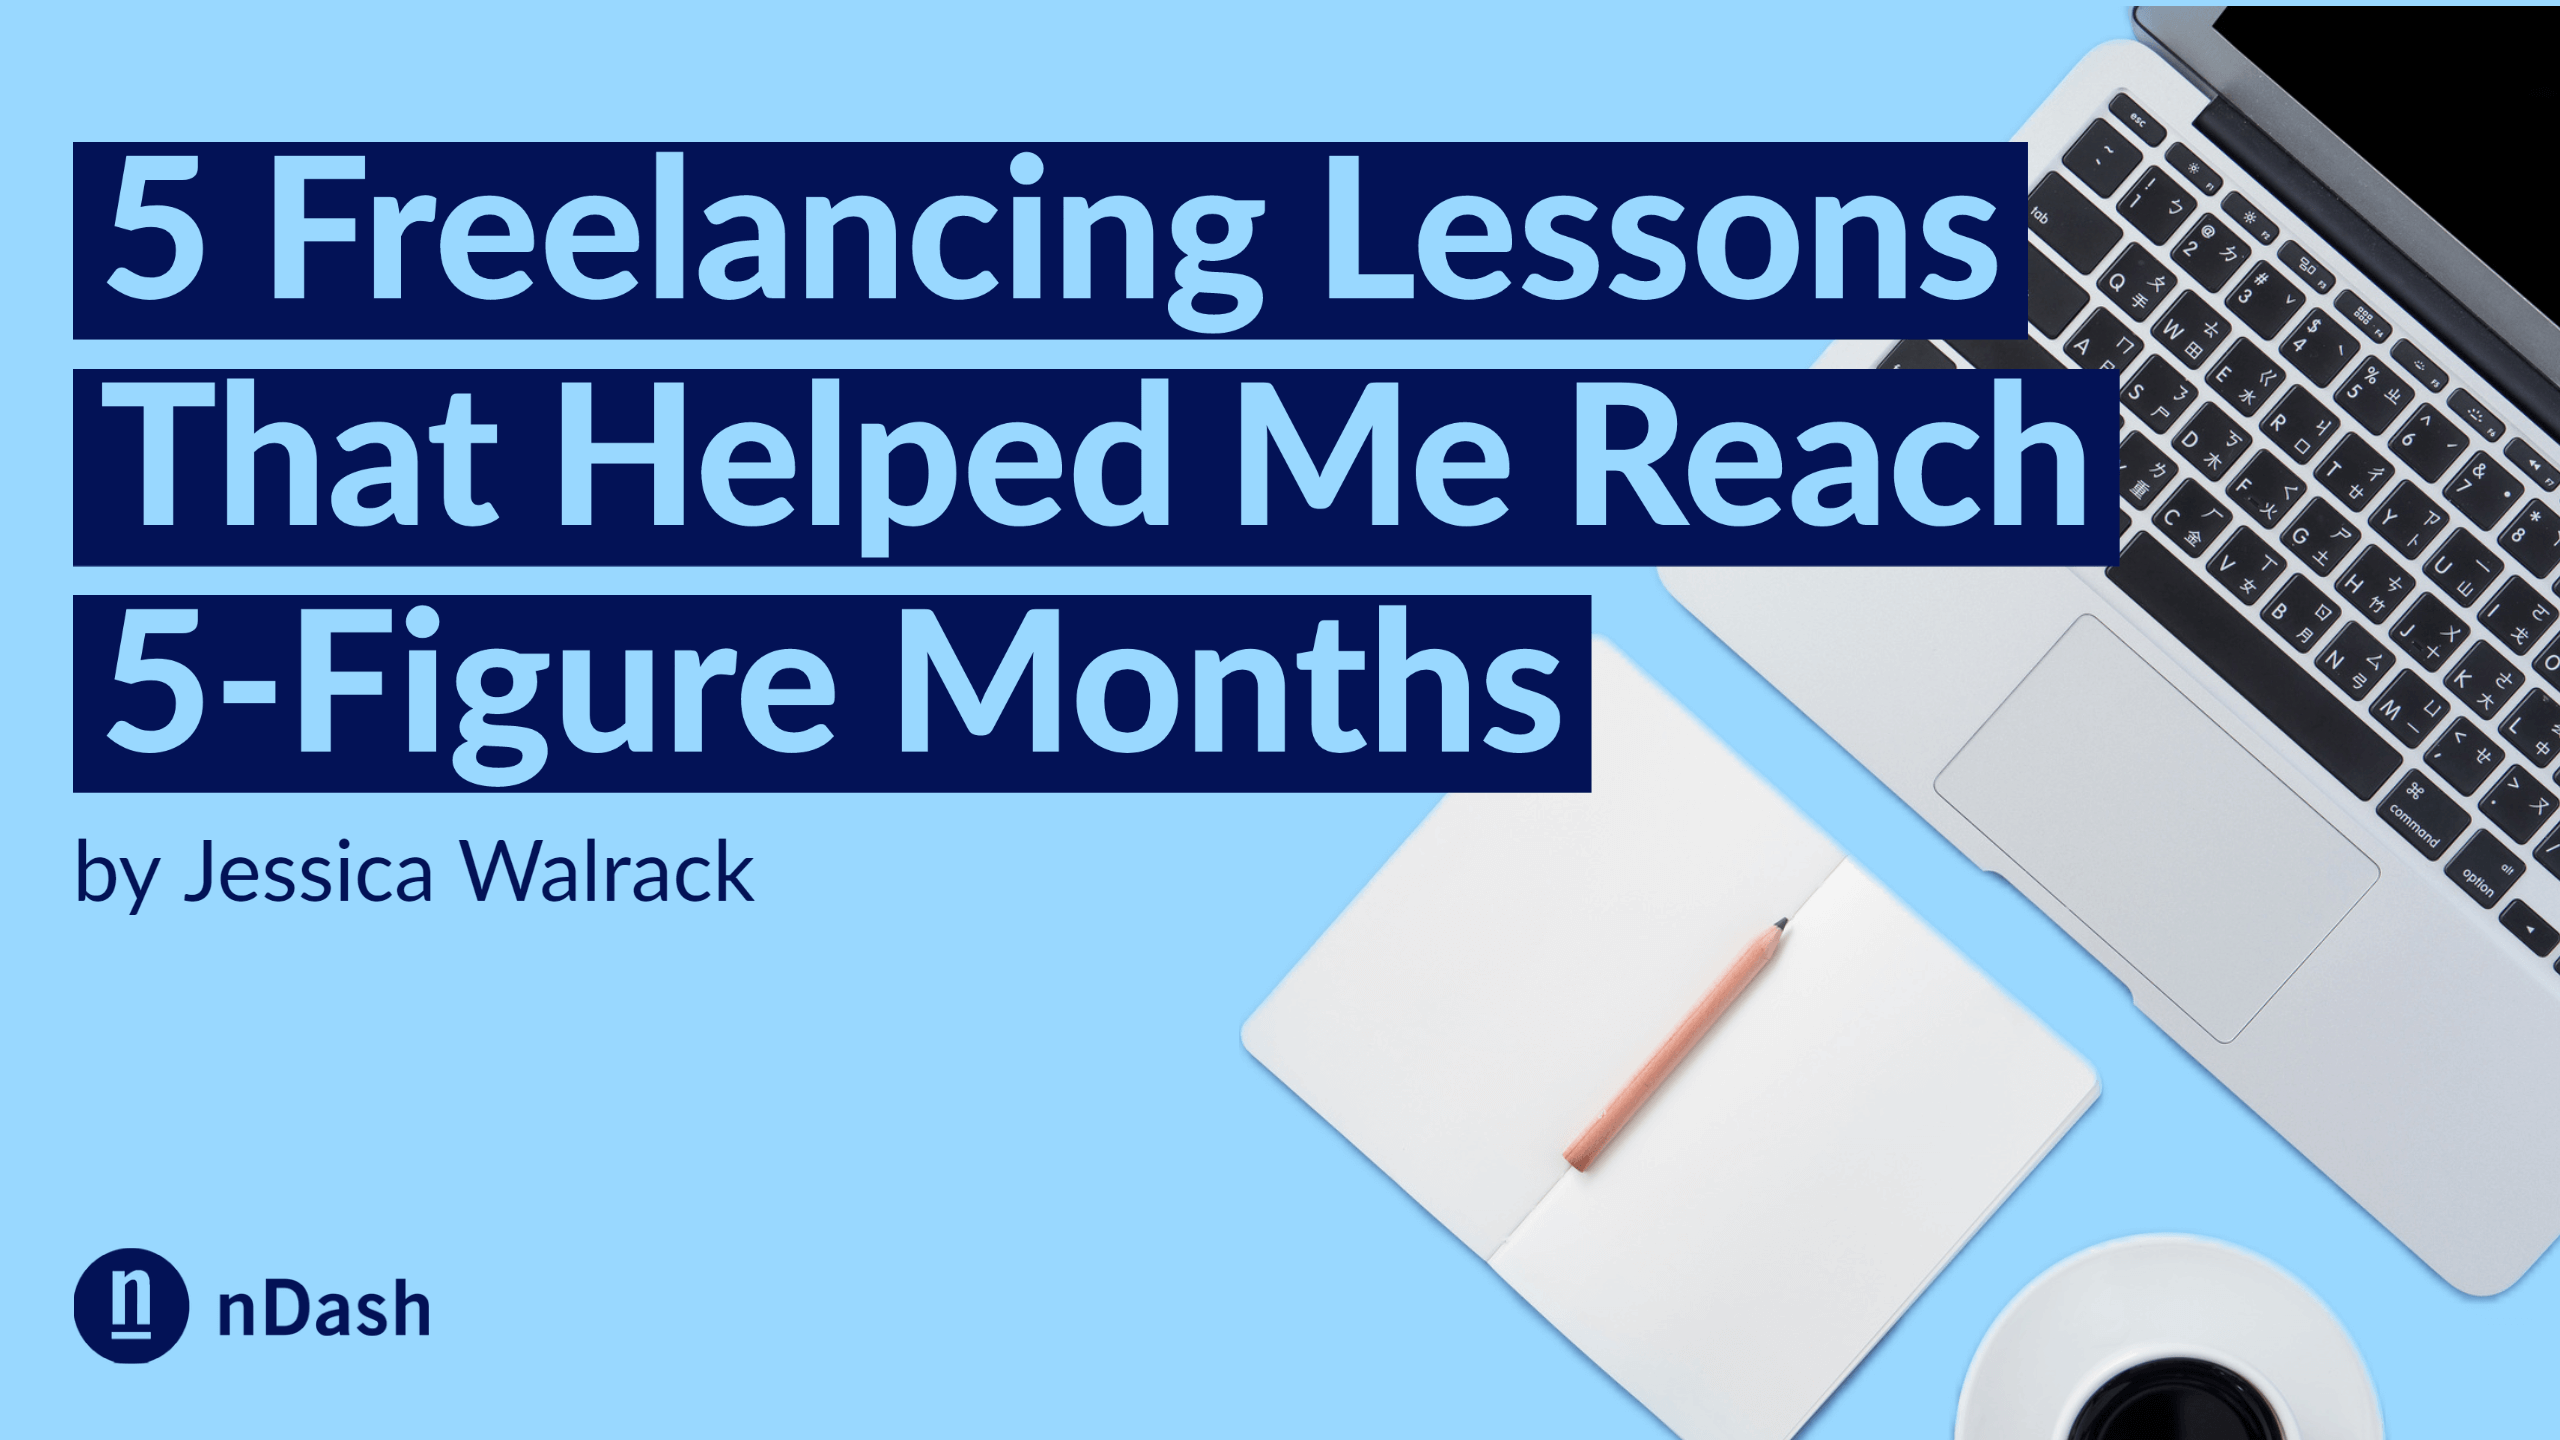 5 Freelance Writing Lessons: Reach 5-Figure Months